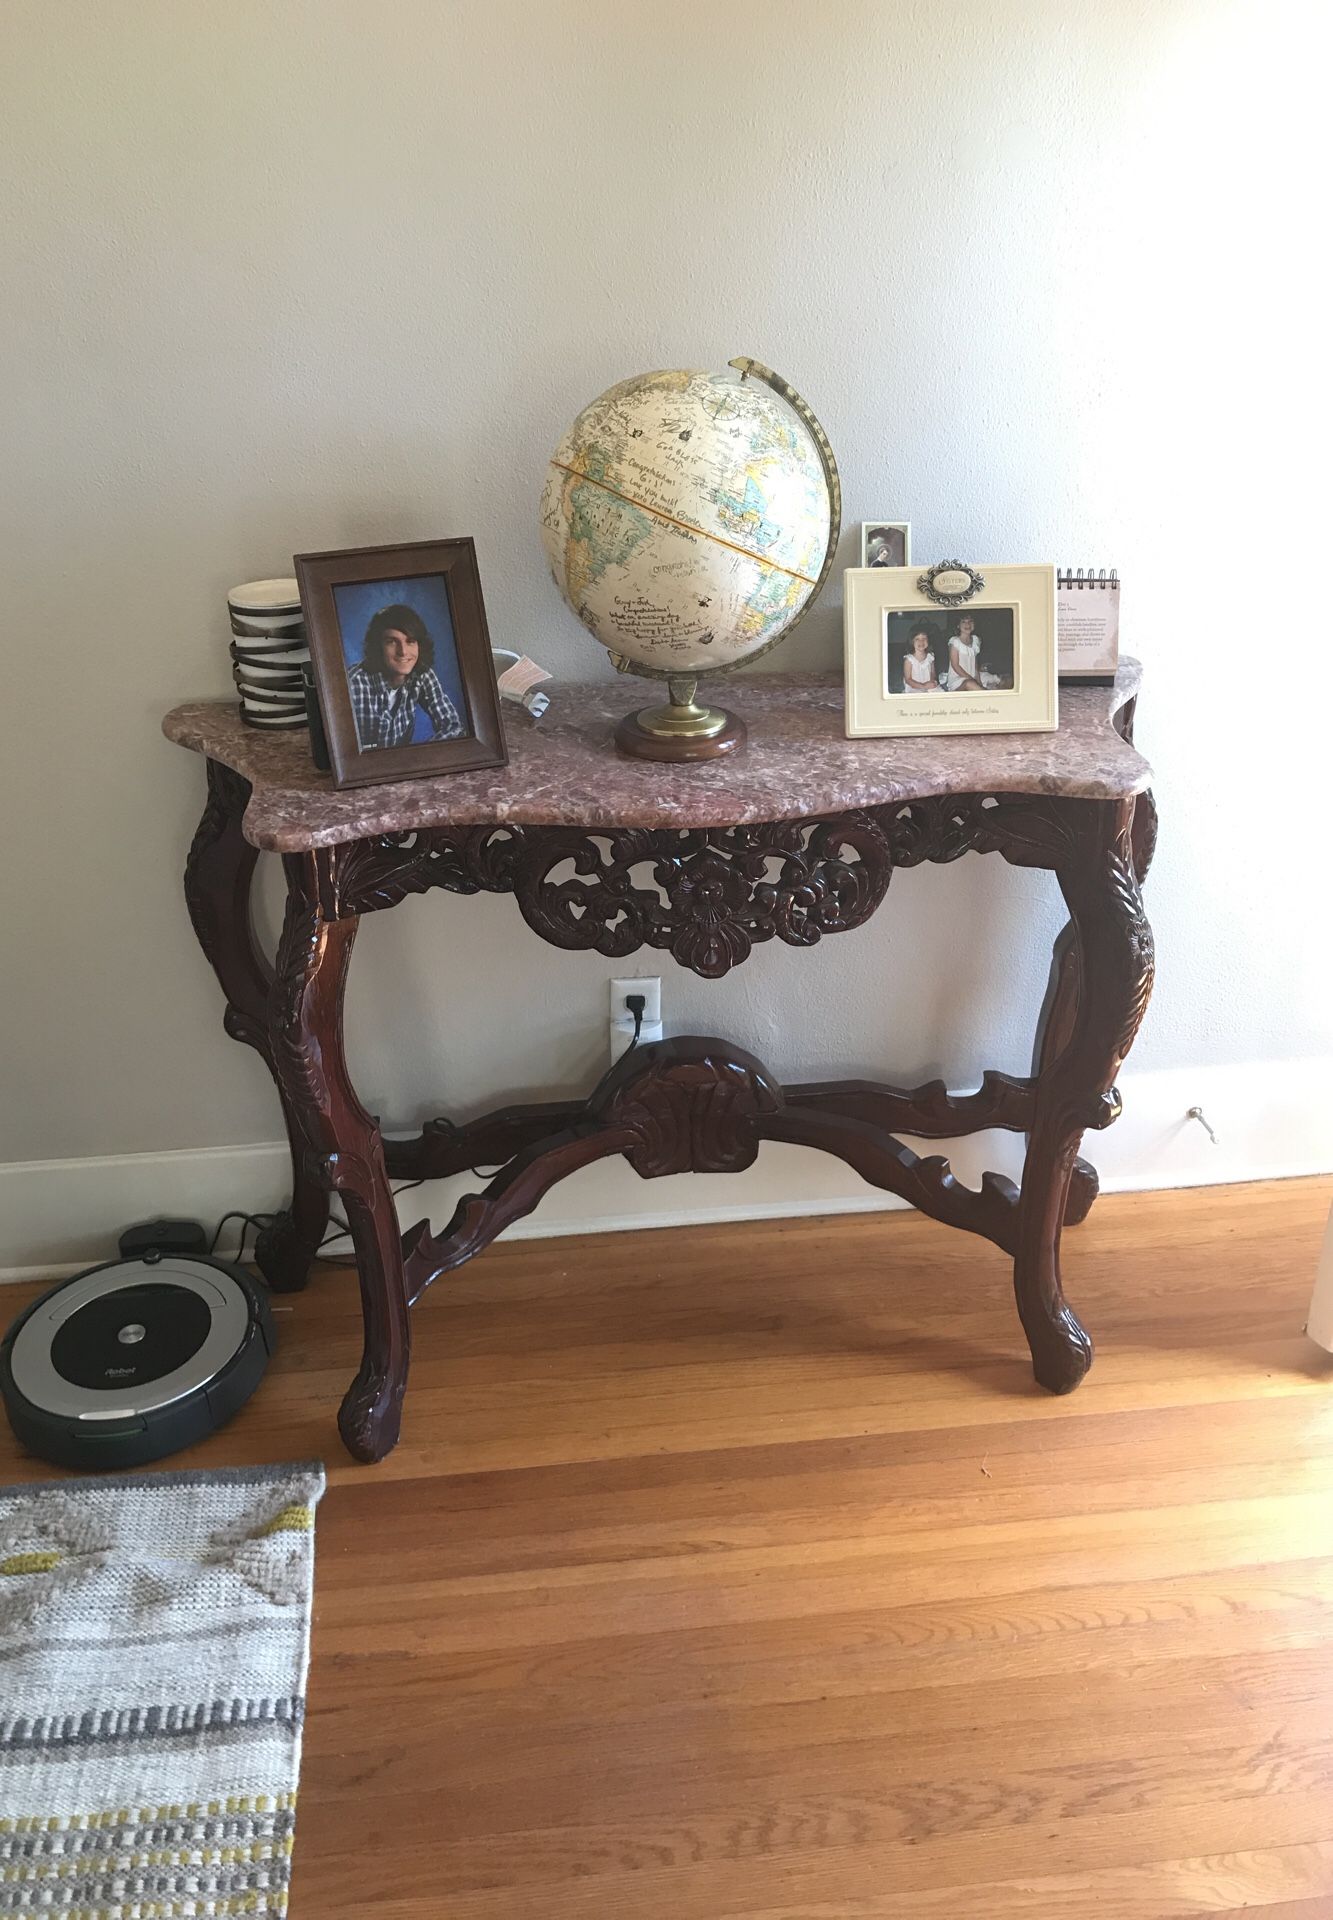 Toscanini Baroque Marble Top Console Table (paid $800 new)